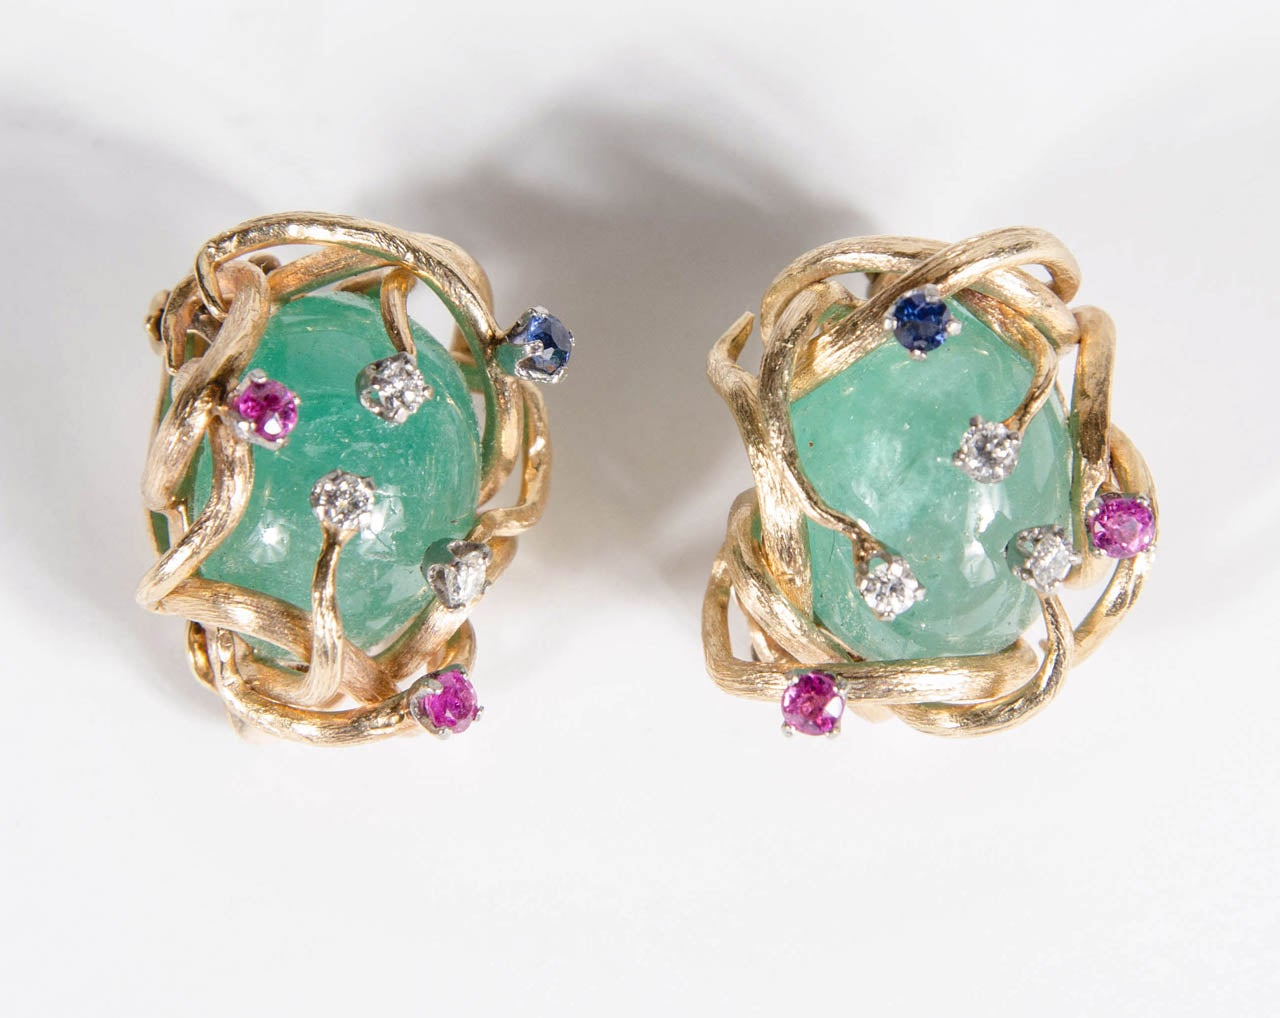 These stunning ear clips feature a cabochon emerald and further mounted with diamonds ,rubies and sapphires. 14.8 dwt inclusive. A great modernist design that features scrolling gold tendrils holding the stones.These can also be converted to pierced